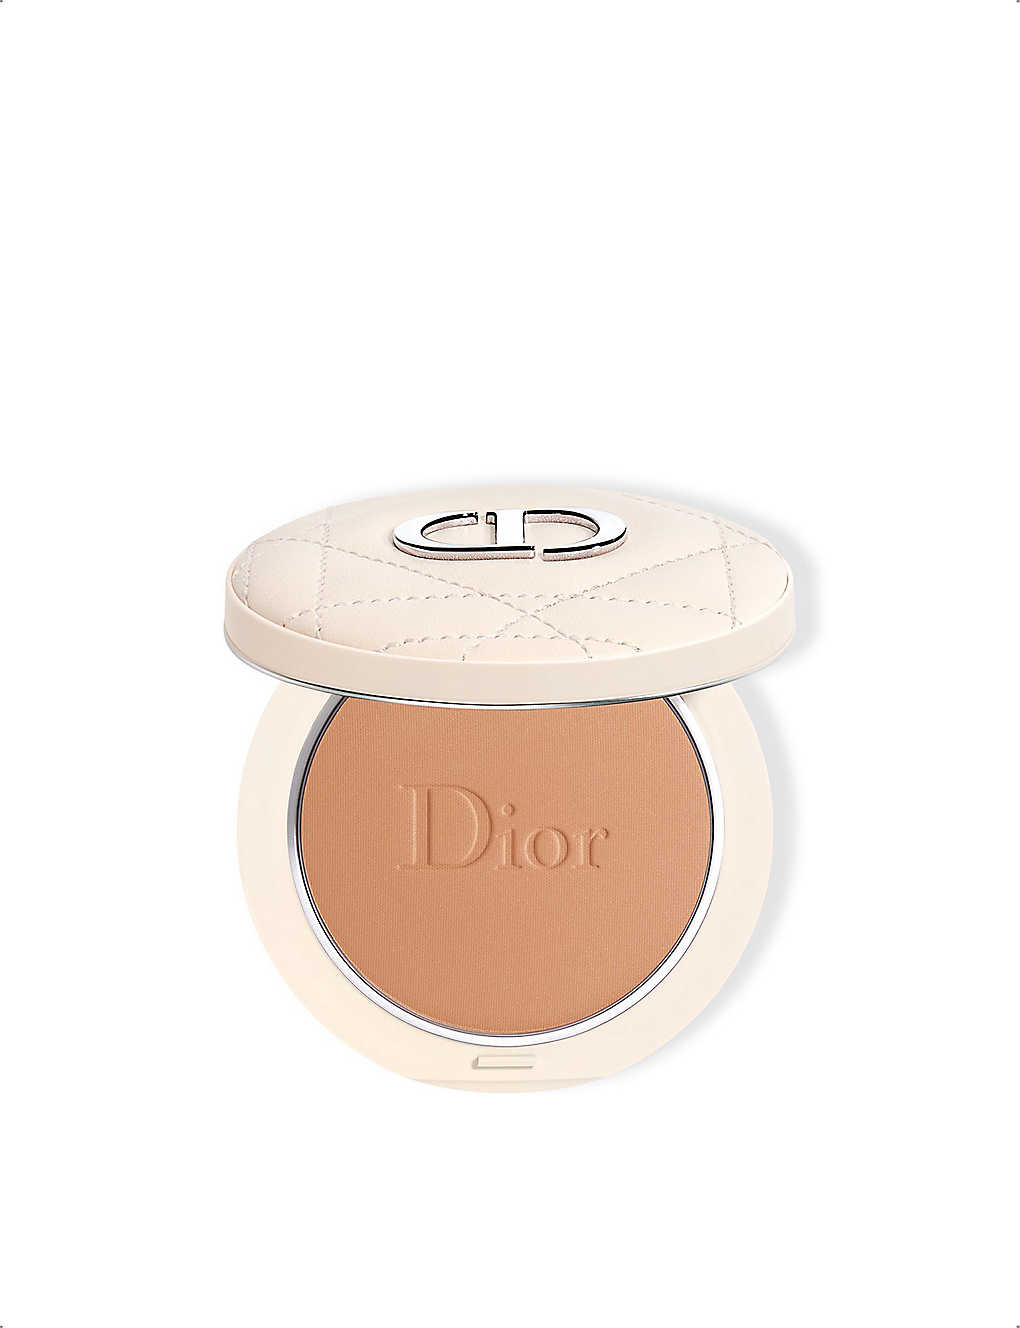 Dior Forever Natural Bronze Powder 9g In 003